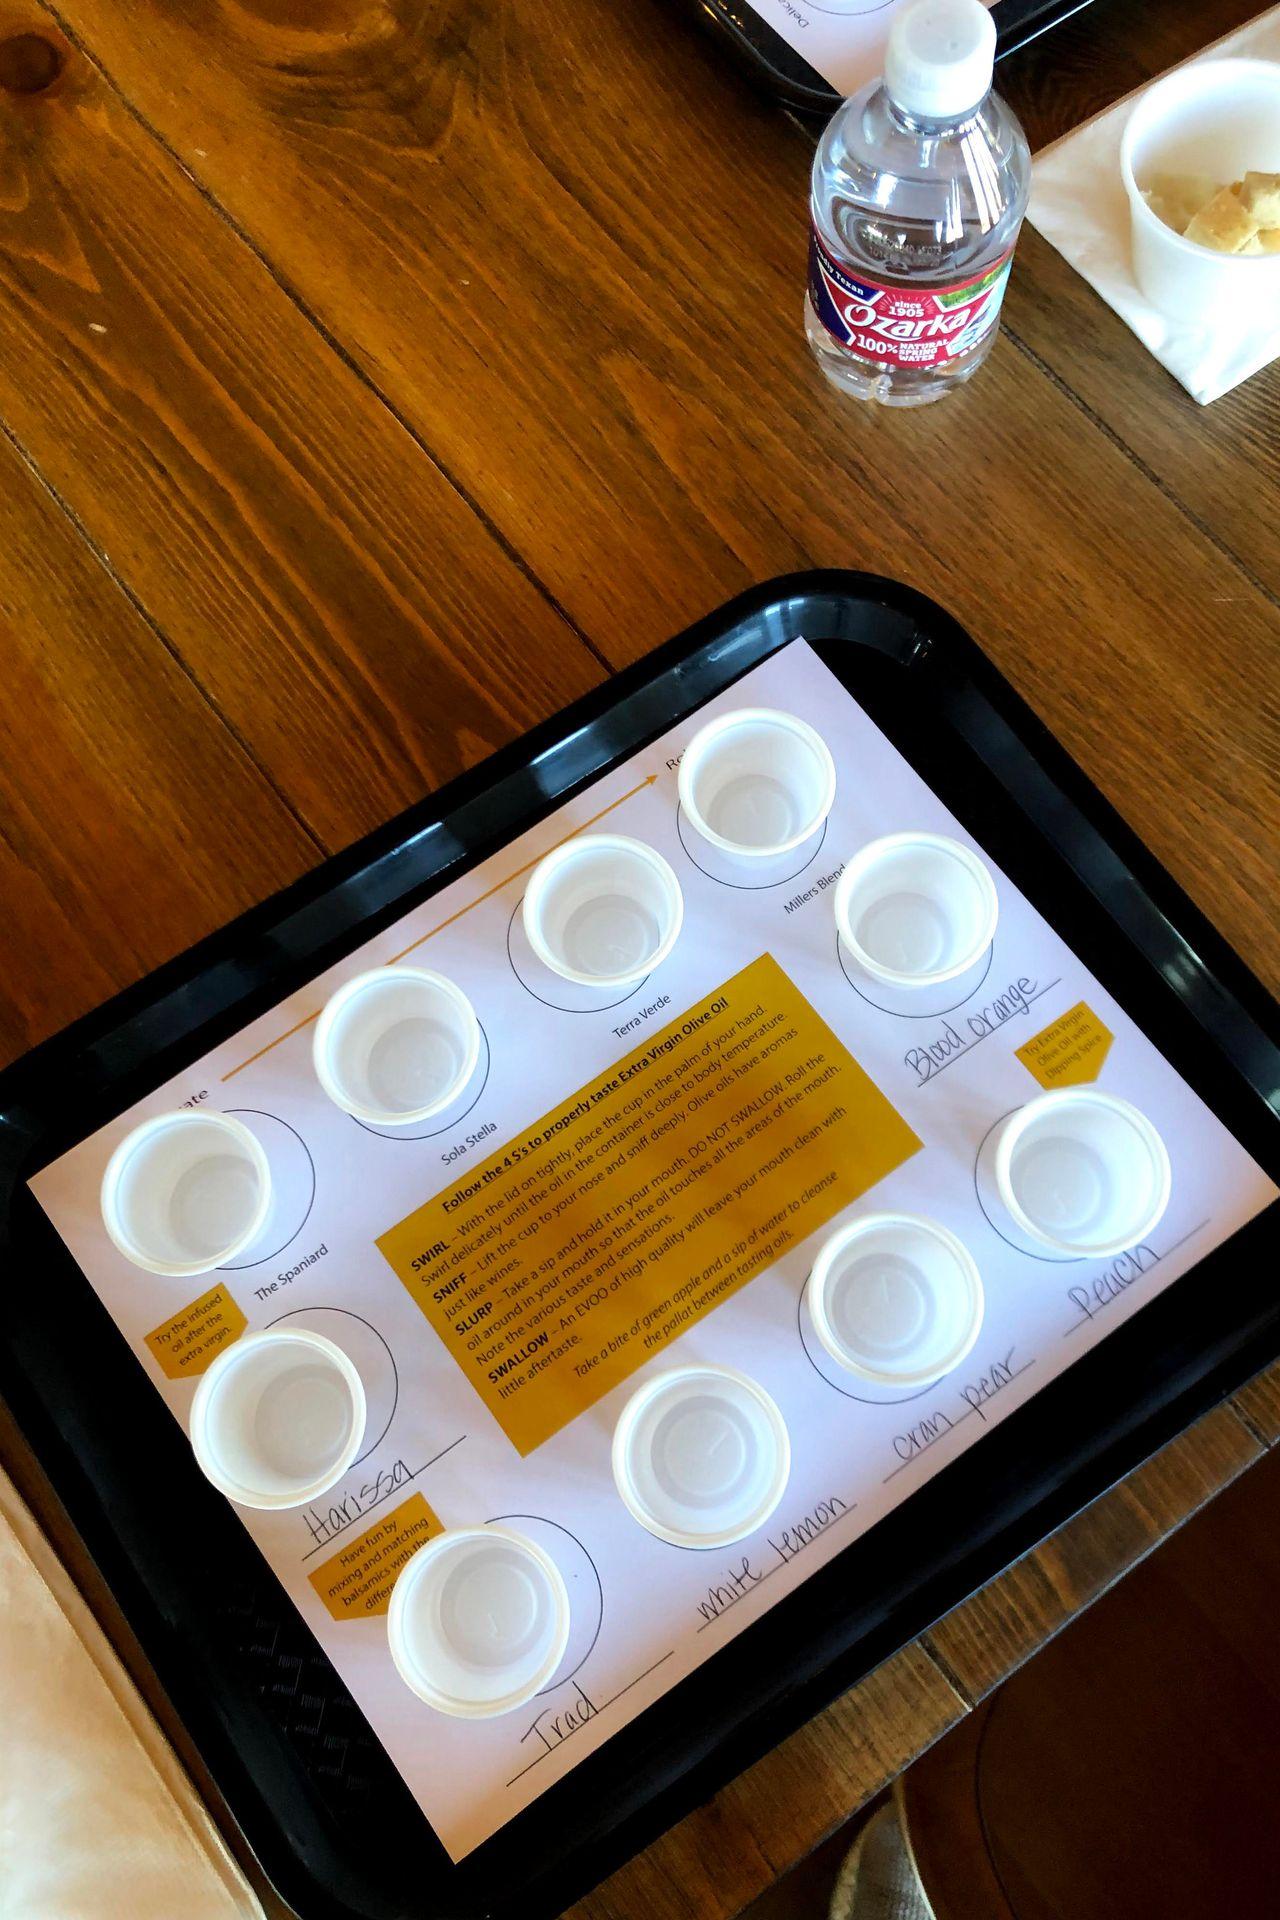 A tray of 10 plastic cups for olive oil samples.